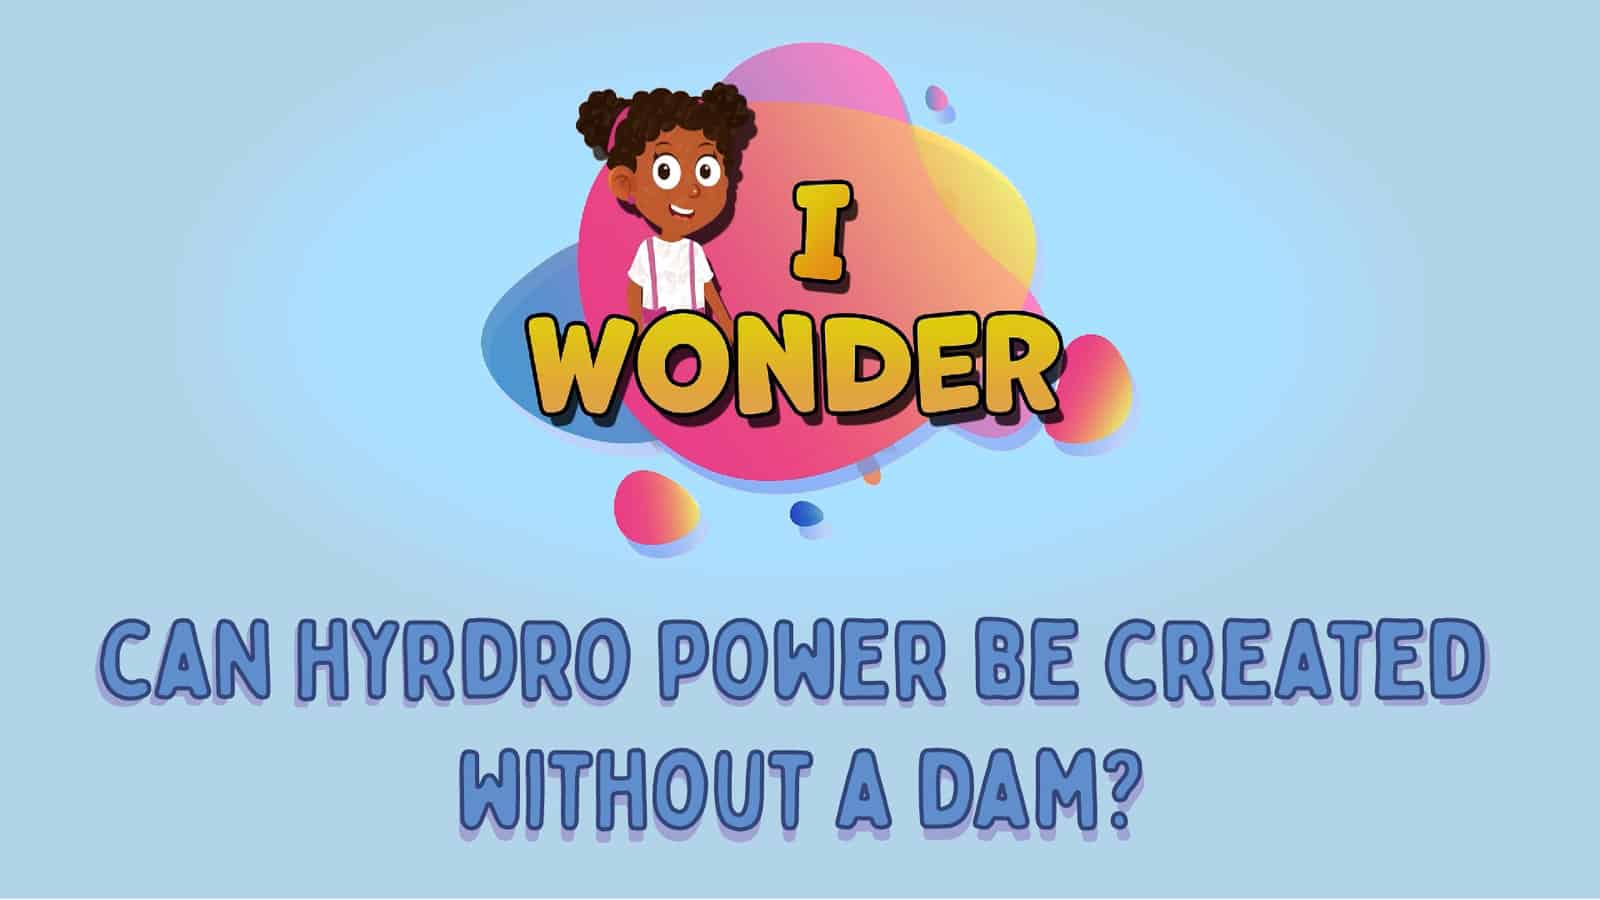 Can Hydro Power Be Created Without A Dam?